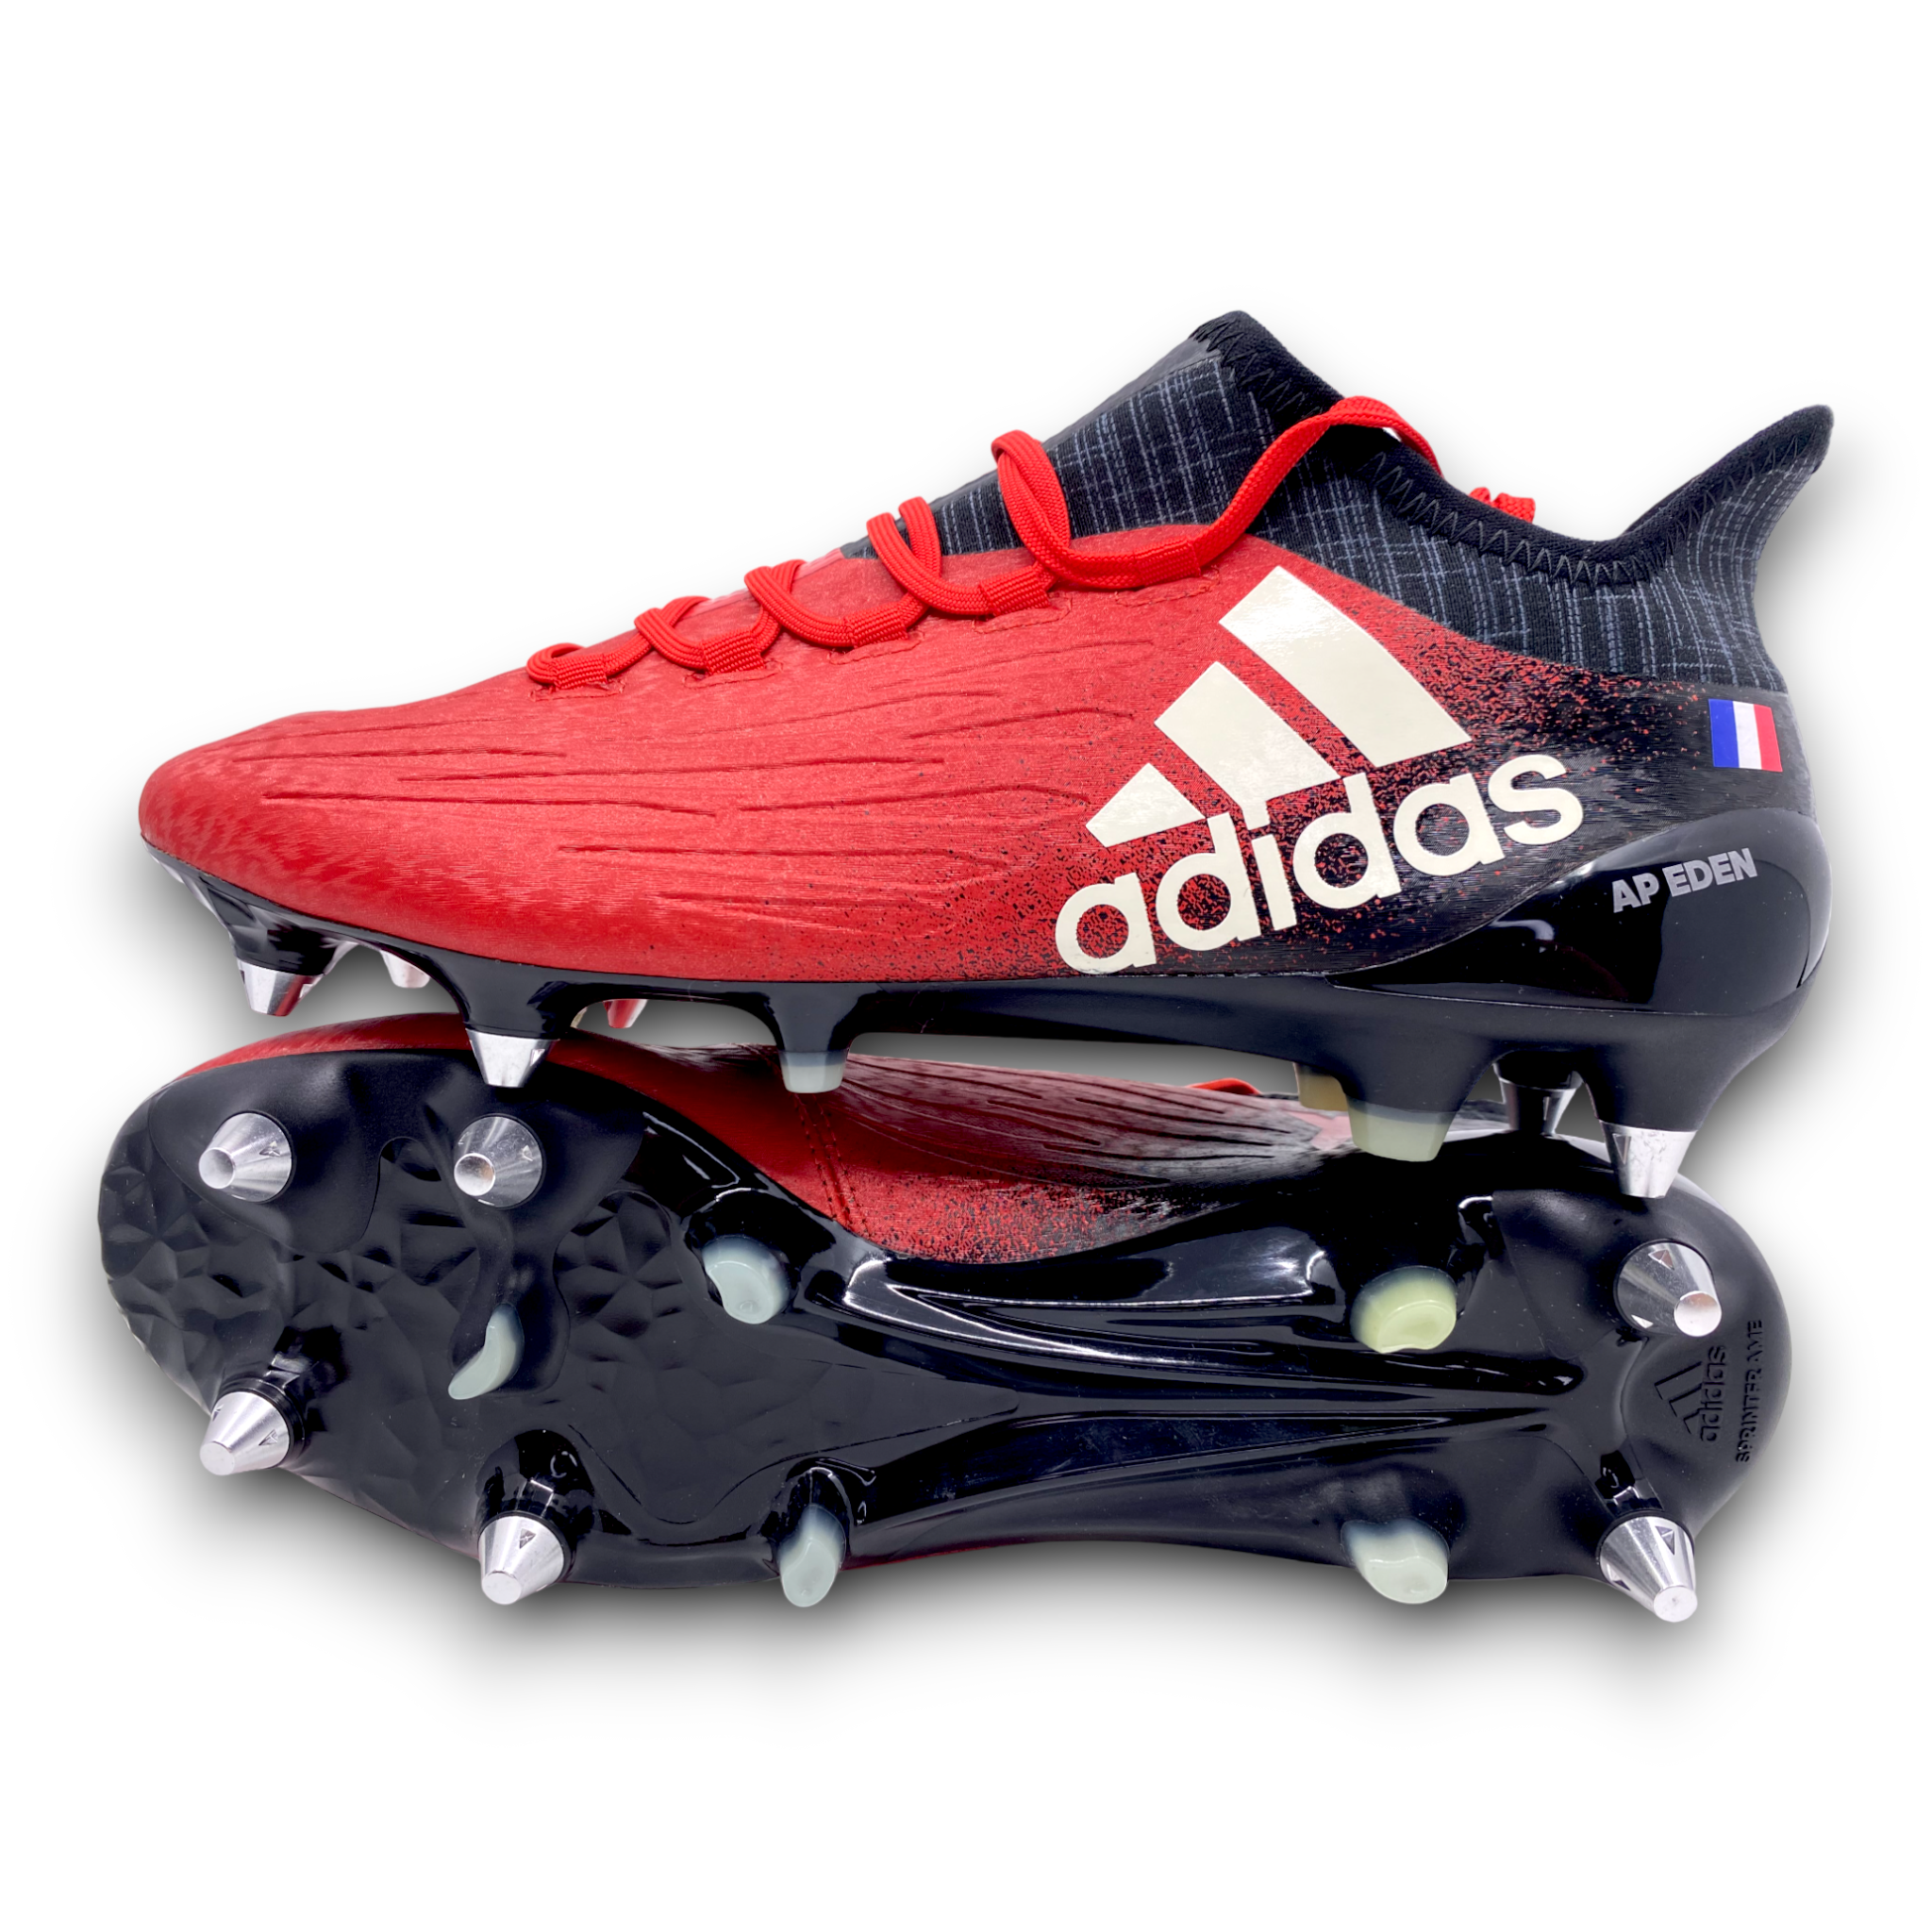 Adidas X 16.1 SG Red Limit" Sponsoring service Pie – shoptcrampons